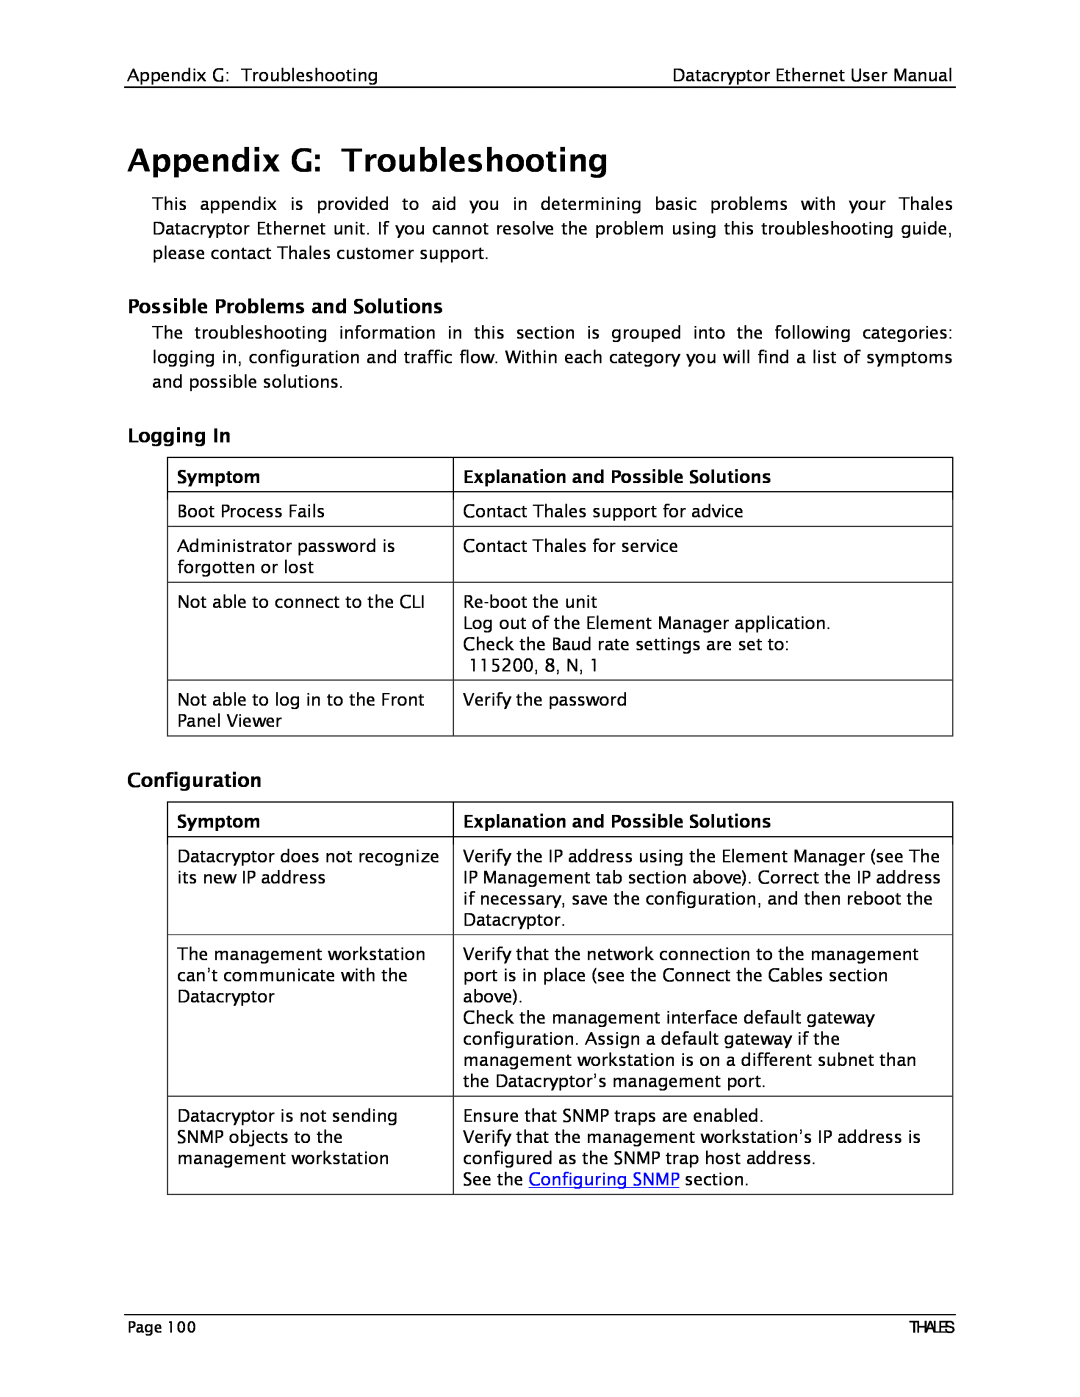 Angenieux 1270A450-005 user manual Appendix G Troubleshooting, Symptom, Explanation and Possible Solutions 